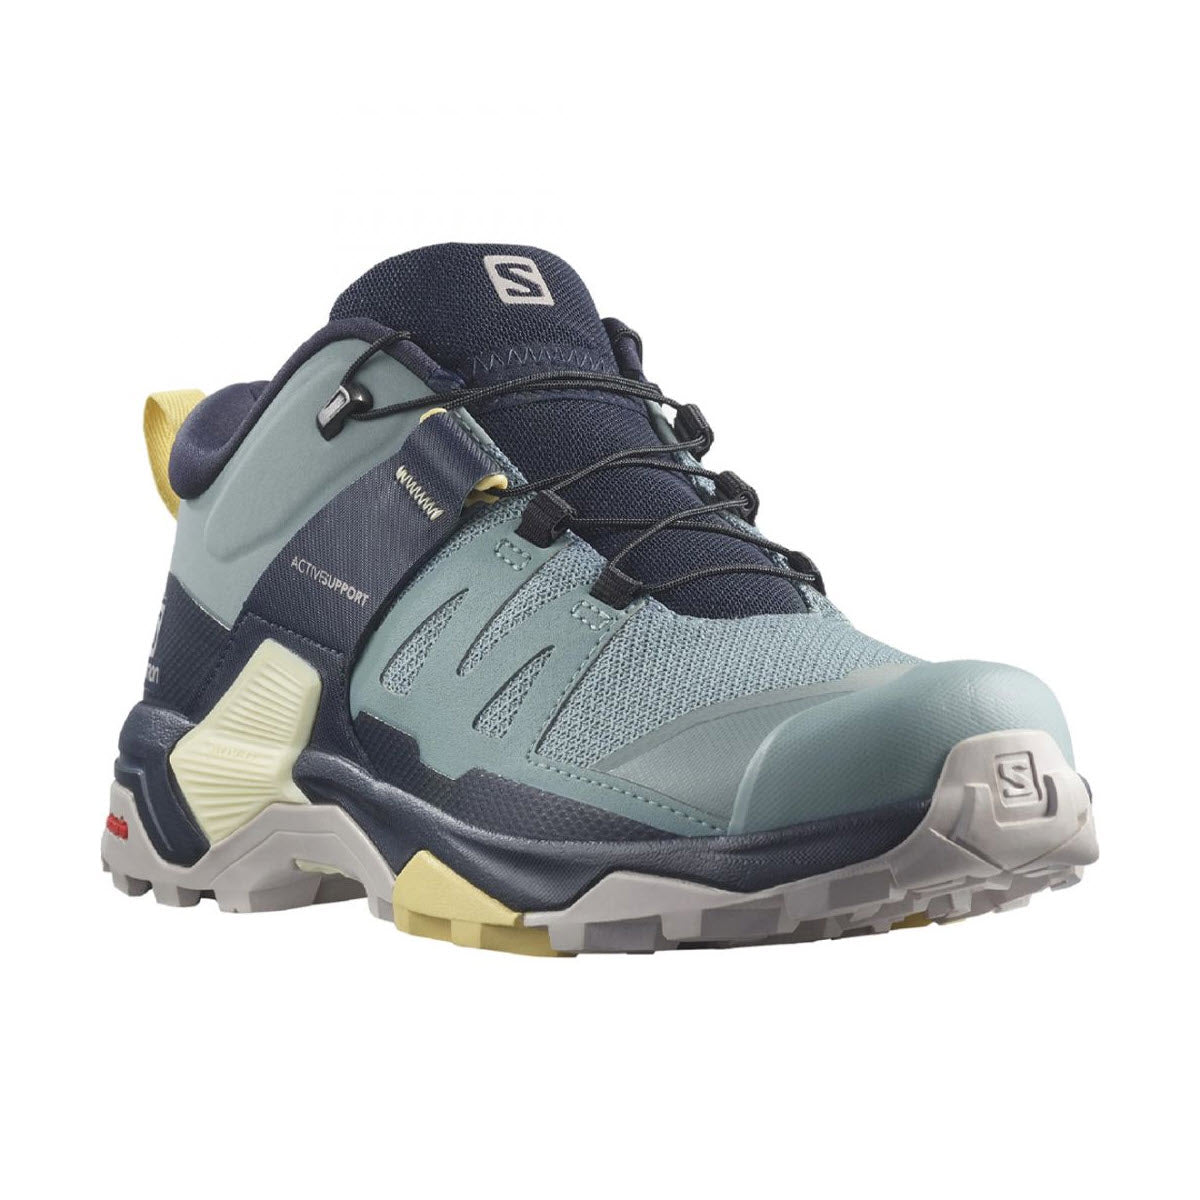 A Salomon X Ultra 4 Trooper/Night Sky/Sun Dress hiking shoe in blue and gray with sturdy laces and a reinforced toe cap, featuring a Contragrip MA outsole, isolated on a white background.